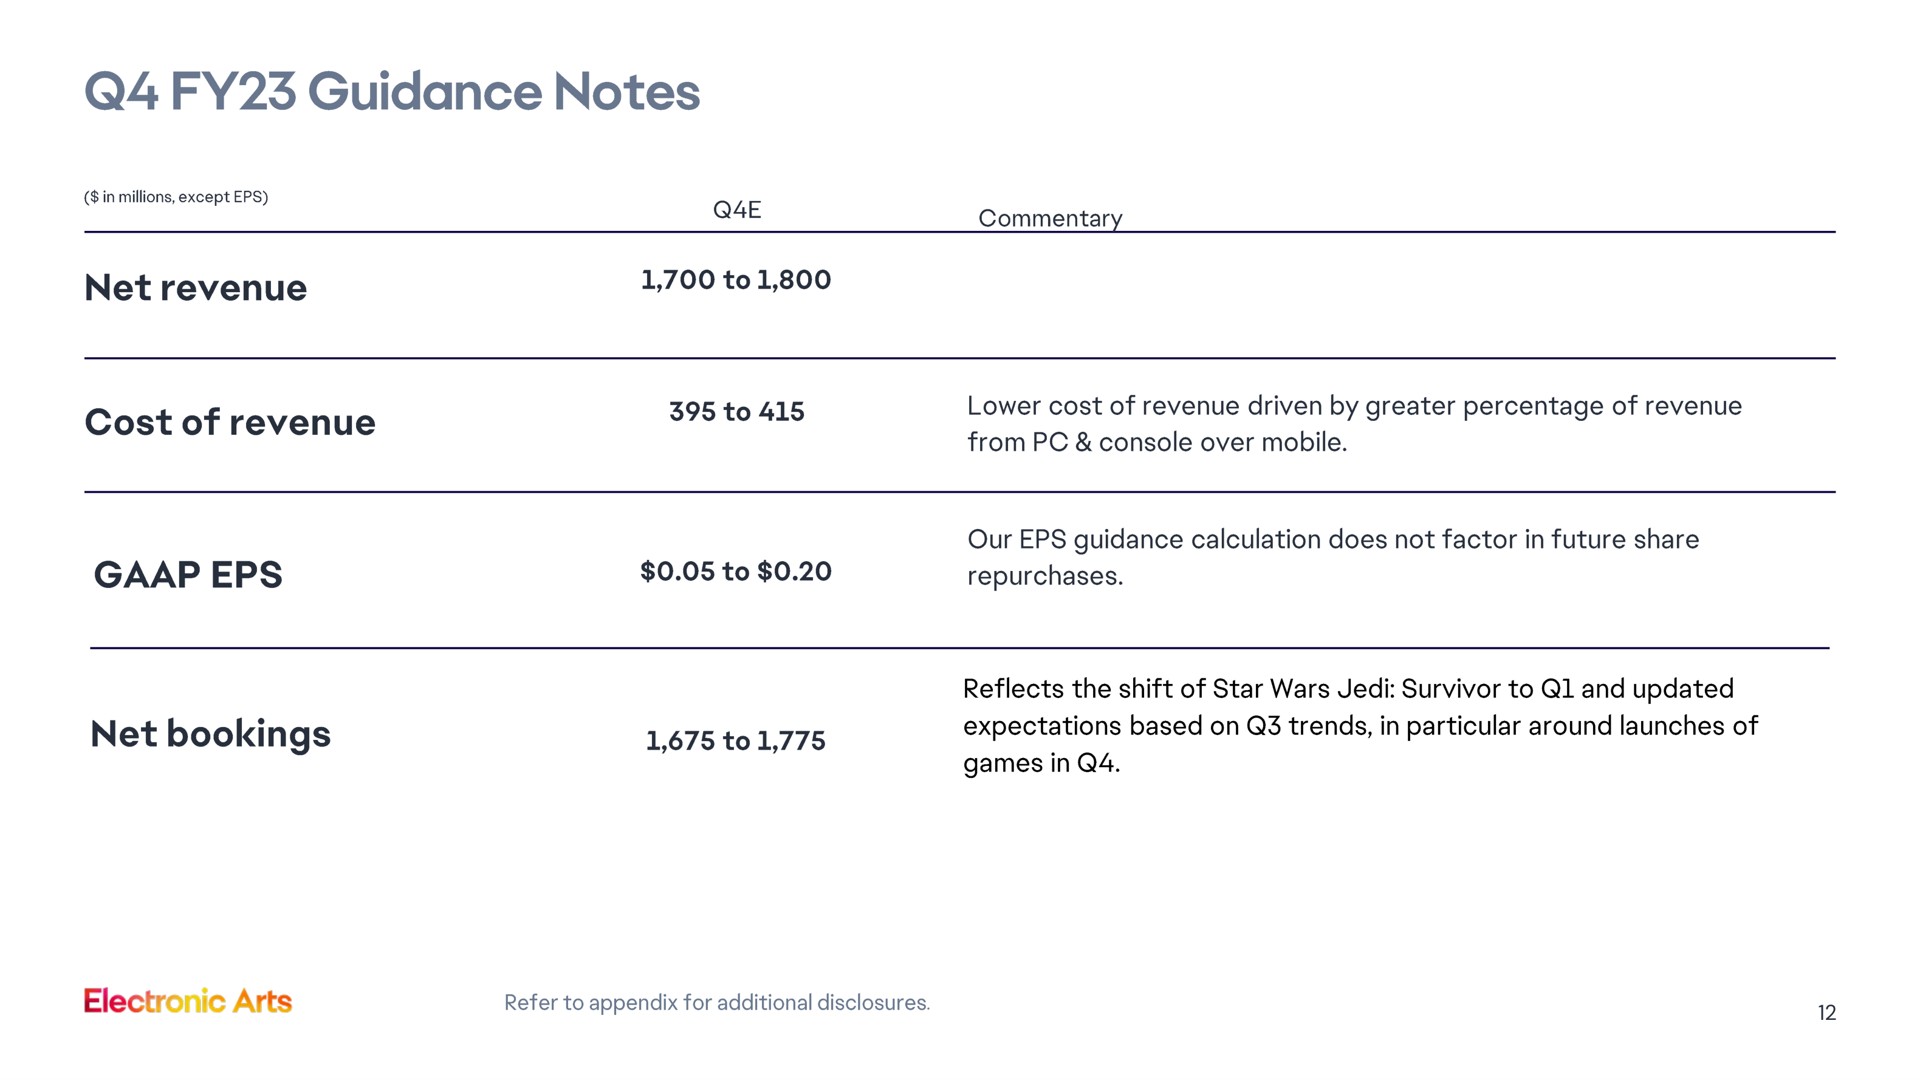 guidance notes cost of revenue net bookings | Electronic Arts